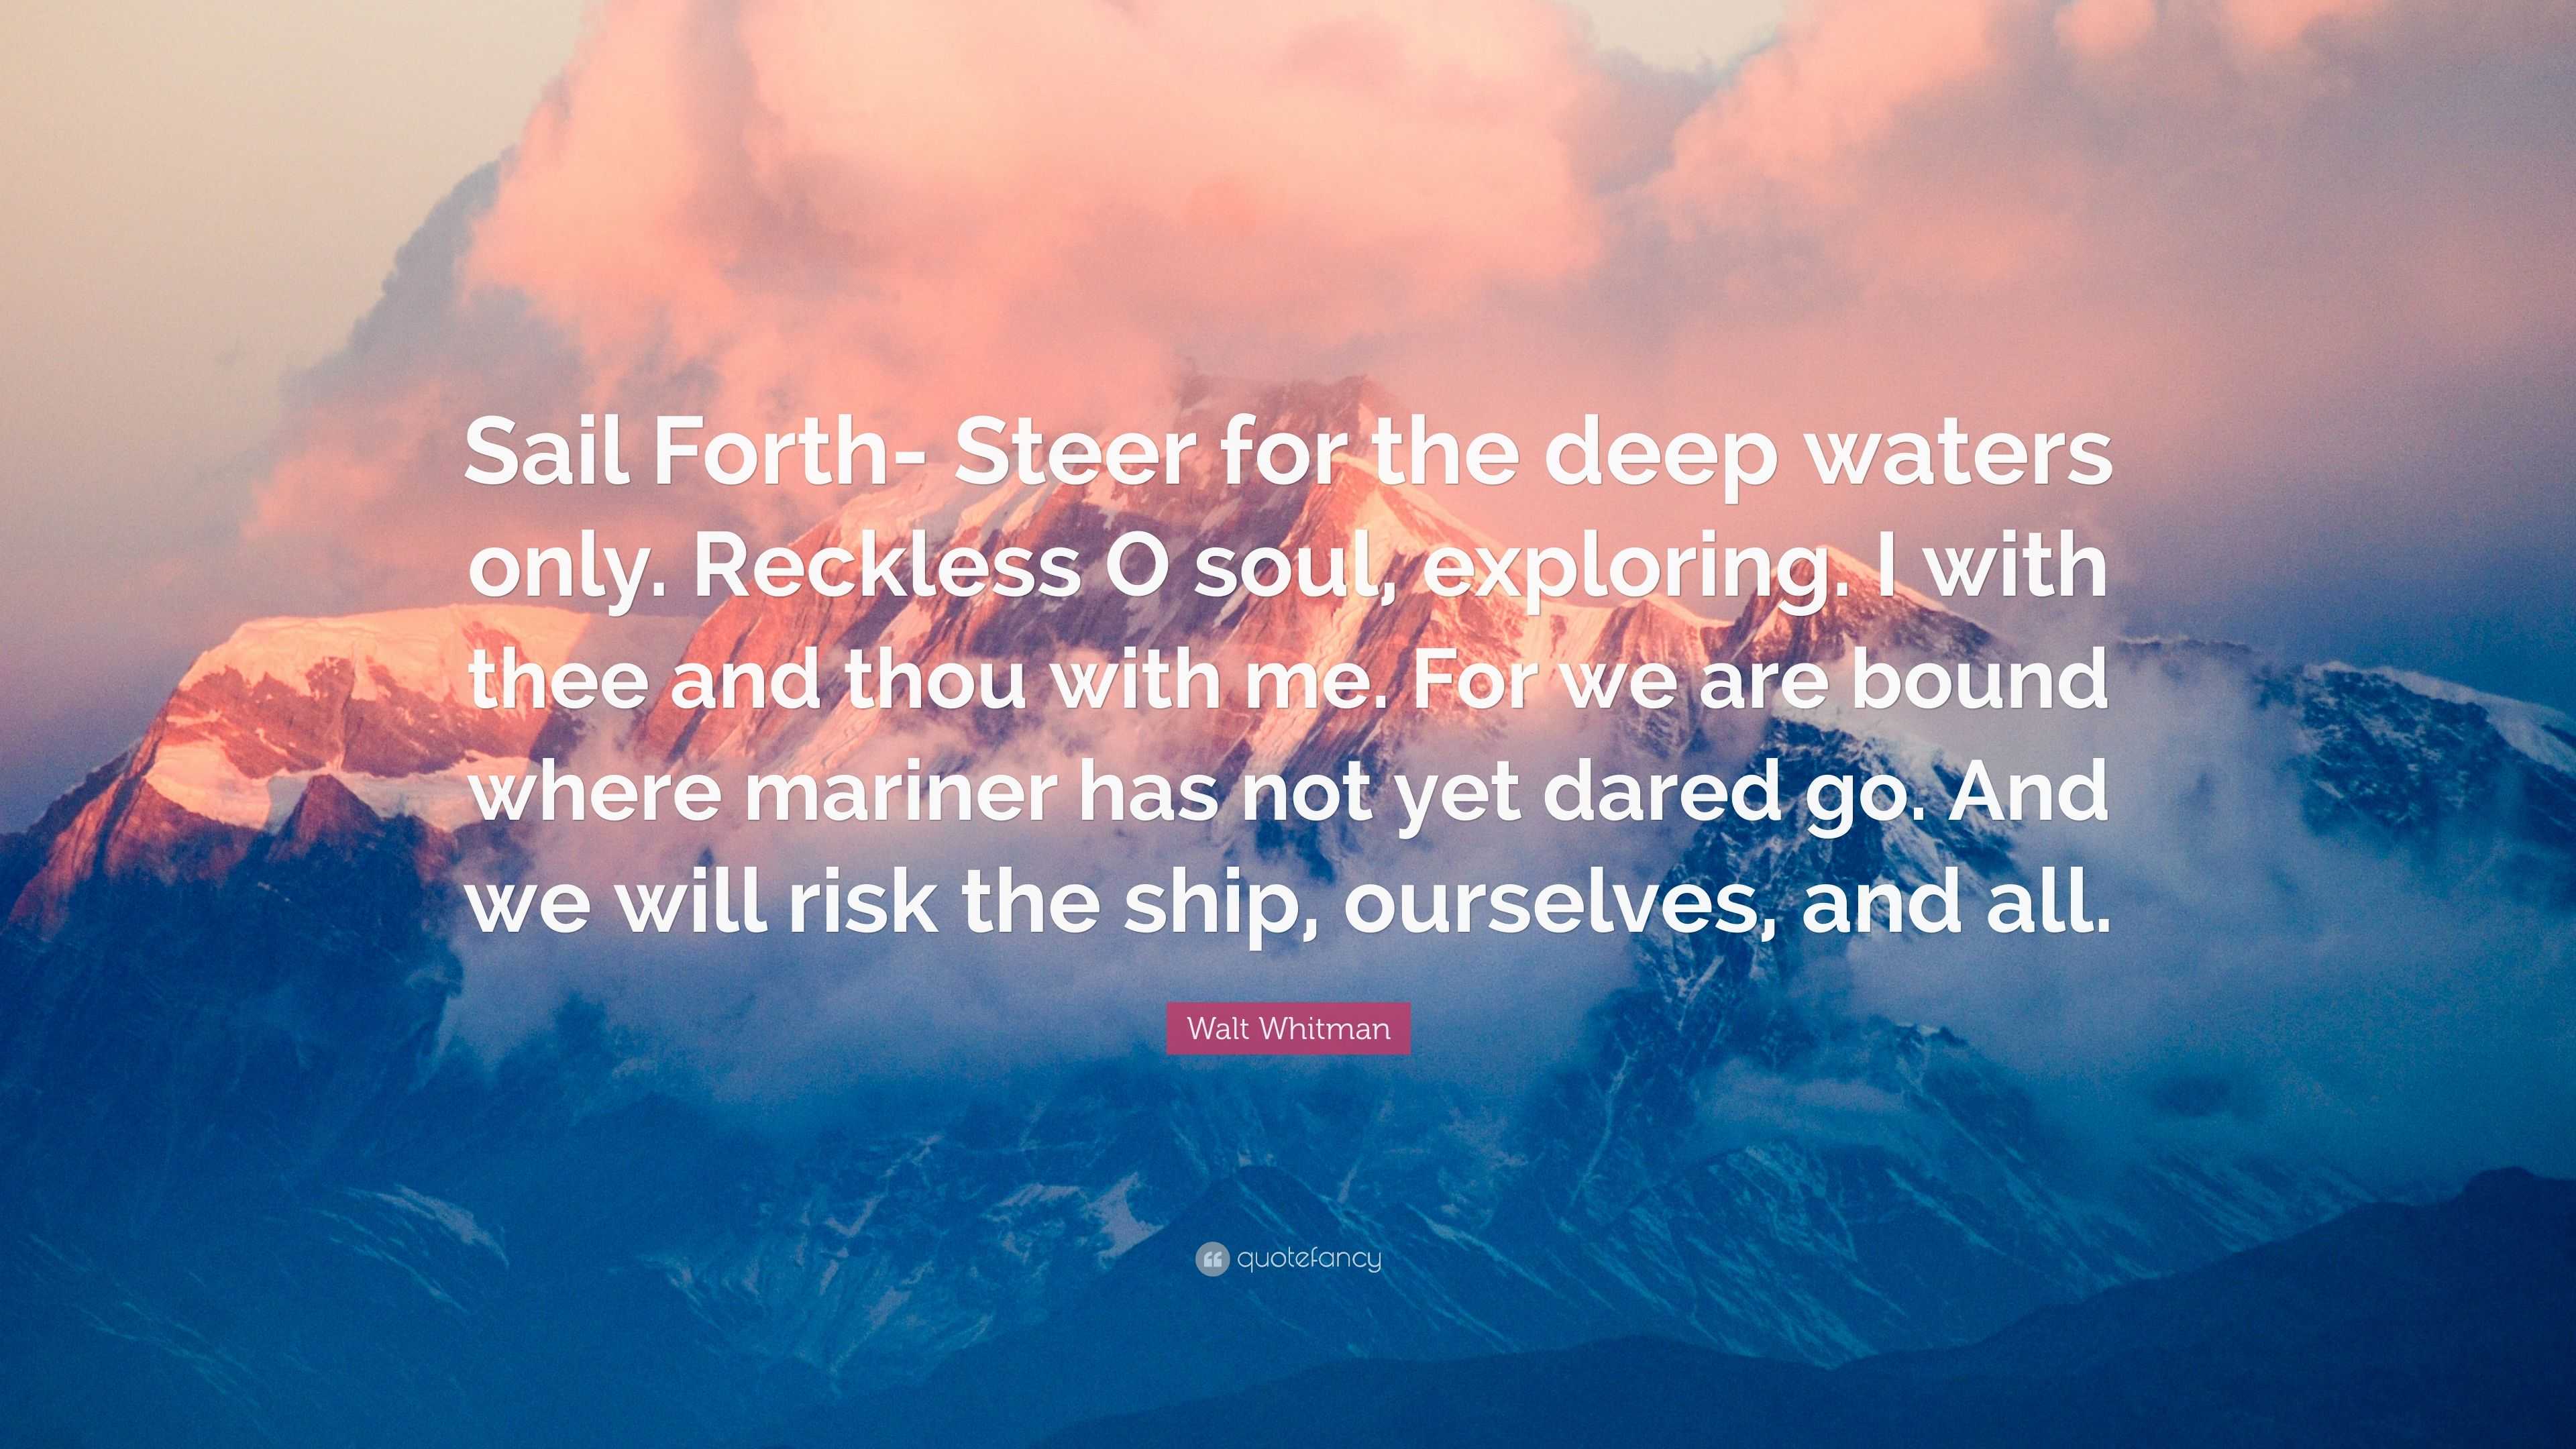 sail forth steer for the deep waters only poem